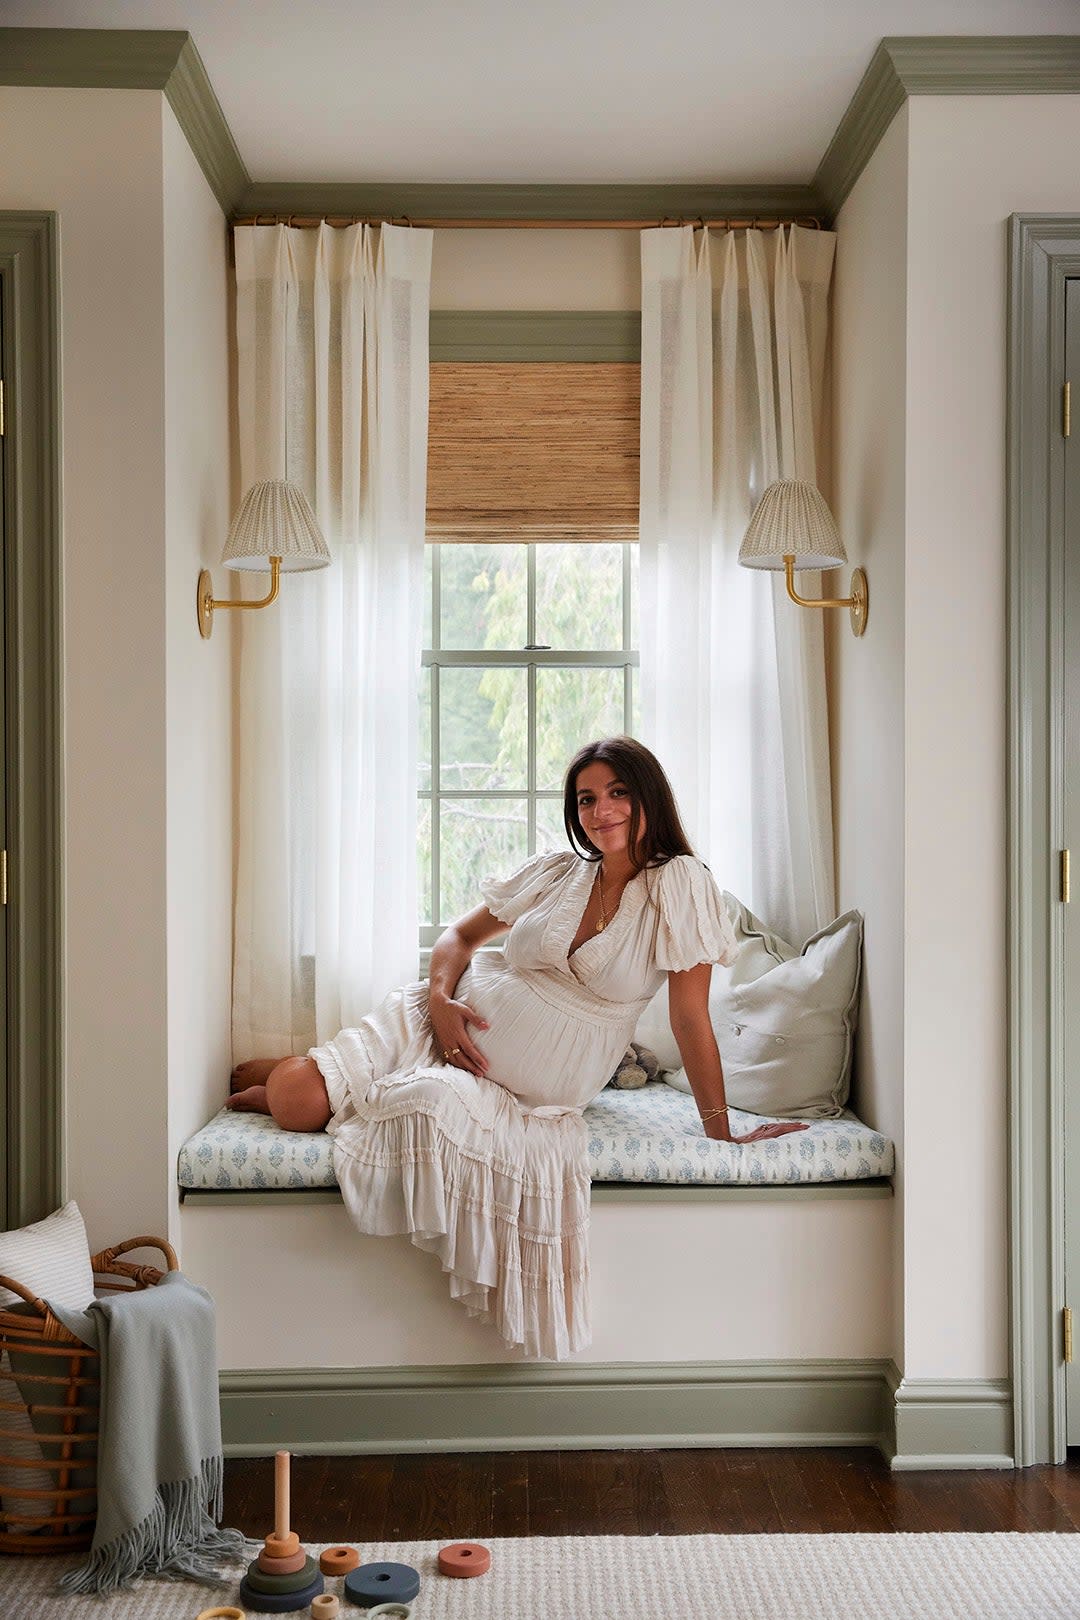 Living in a Rental Didn’t Stop This New Mom From Designing Her Dream Nursery photo